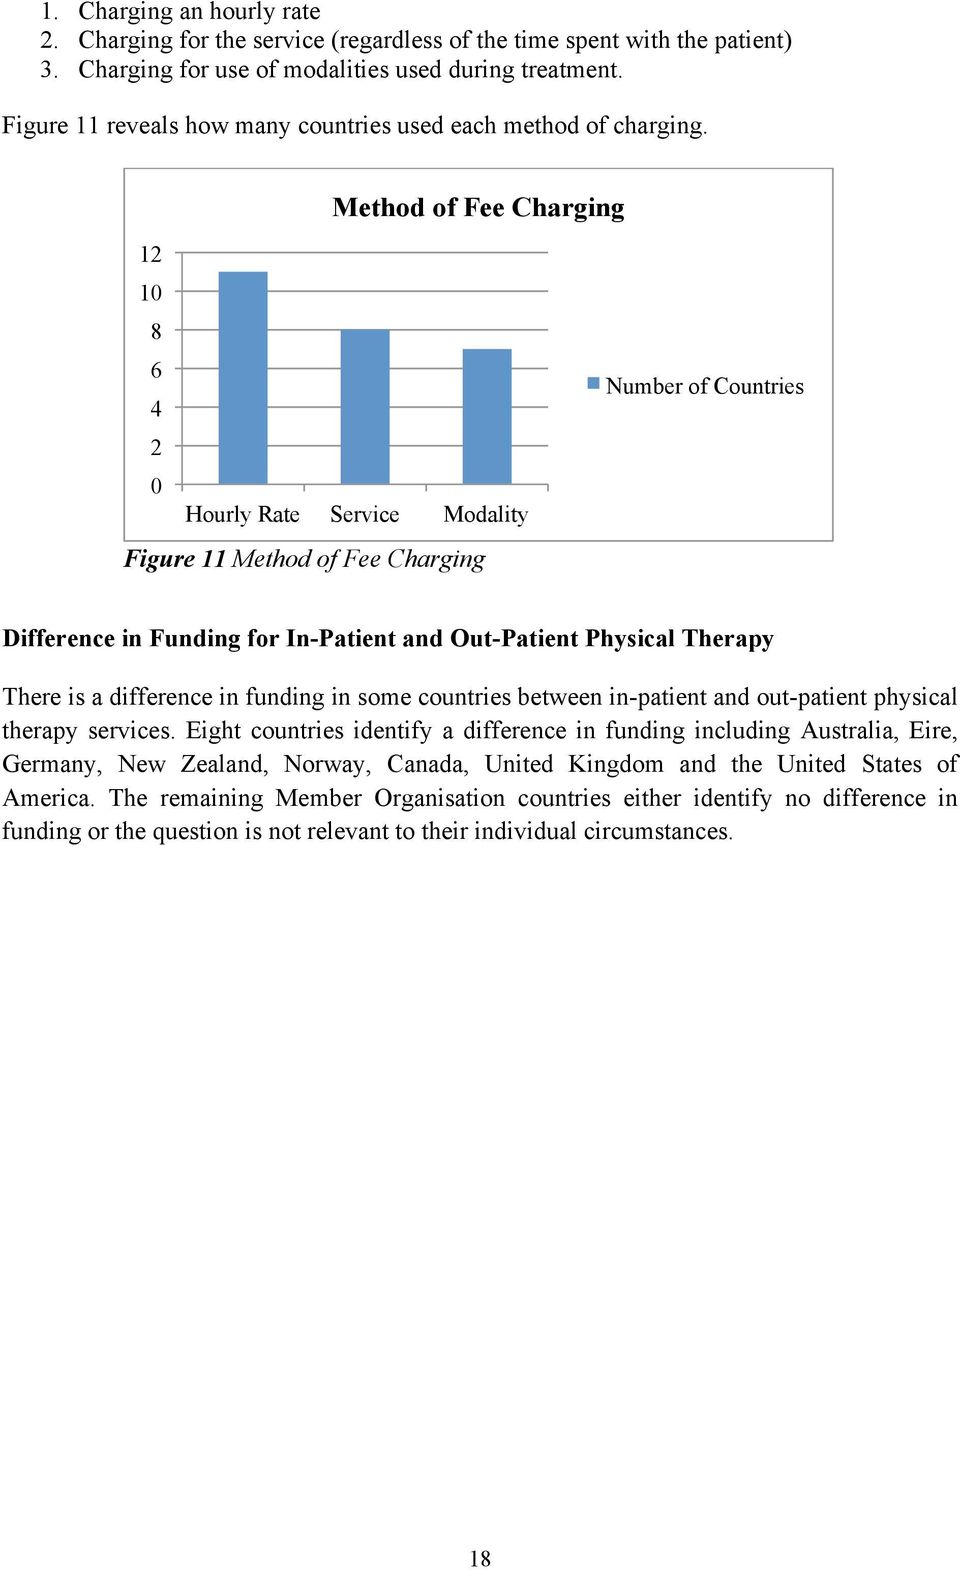 Method of Fee Charging 12 1 8 6 4 2 Hourly Rate Service Modality Figure 11 Method of Fee Charging Number of Countries Difference in Funding for In-Patient and Out-Patient Physical Therapy There is a